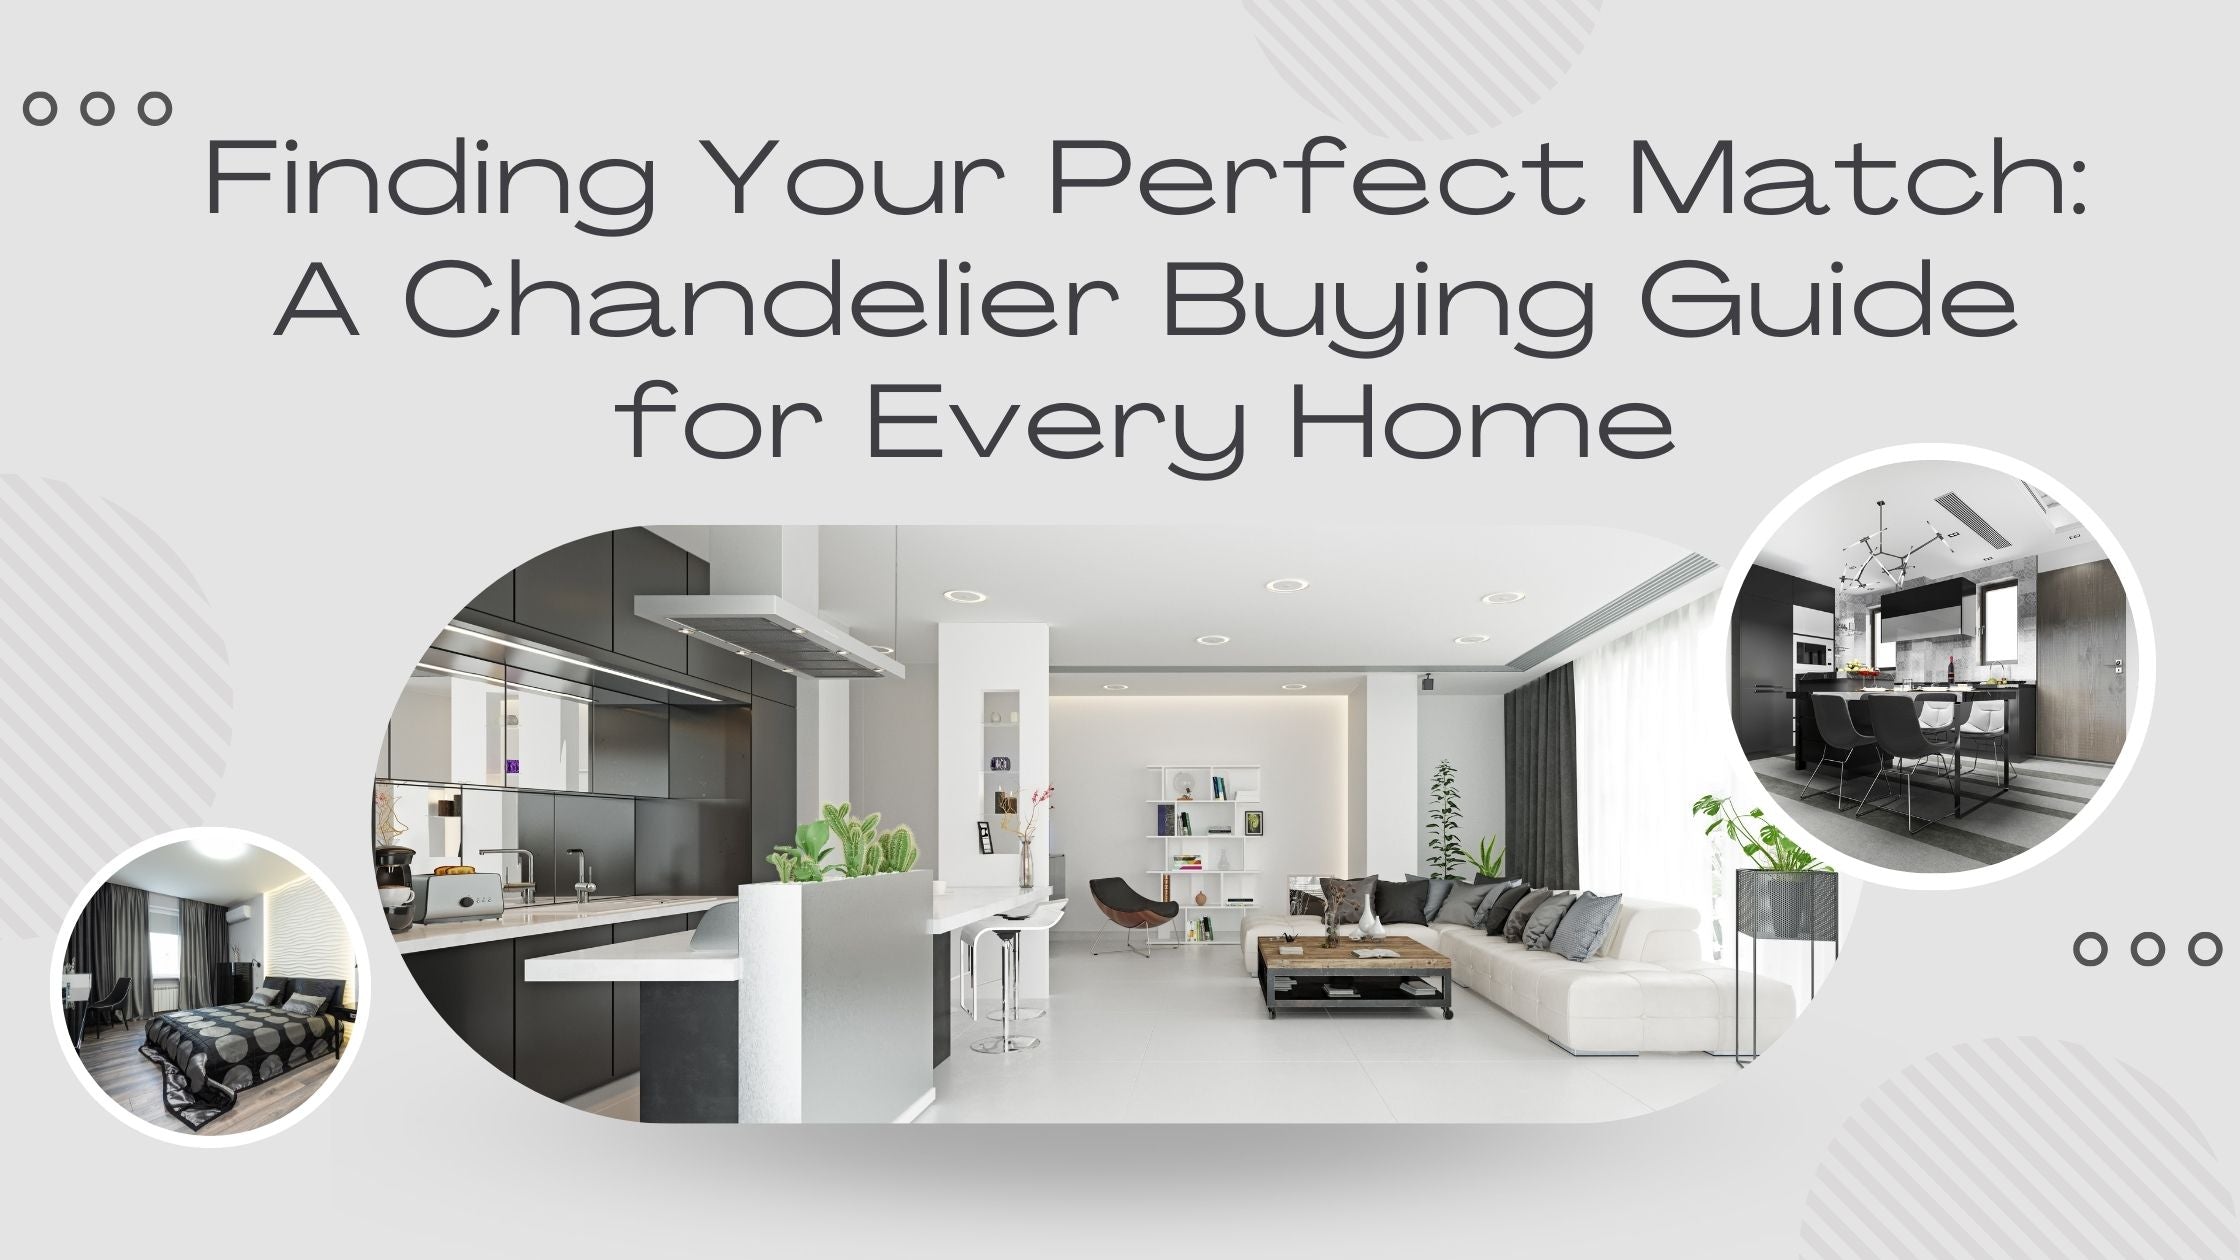 Finding Your Perfect Match: A Chandelier Buying Guide for Every Home